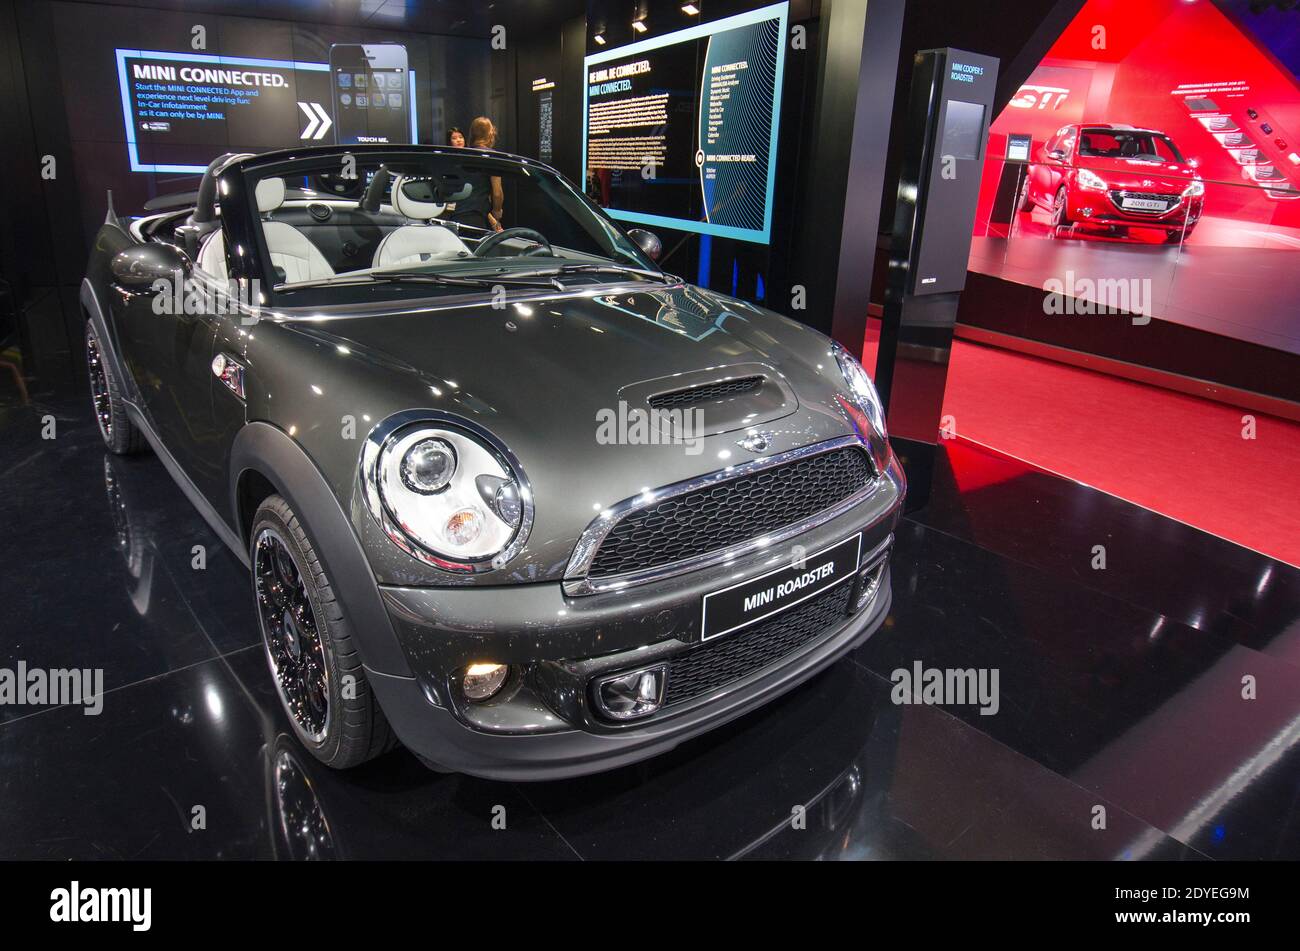 New BMW Mini Roadster pictured during the 83rd International Geneva Motor Show, in Geneva, Switzerland on March 6, 2013. Photo by Gilles Bertrand/ABACAPRESS.COM Stock Photo